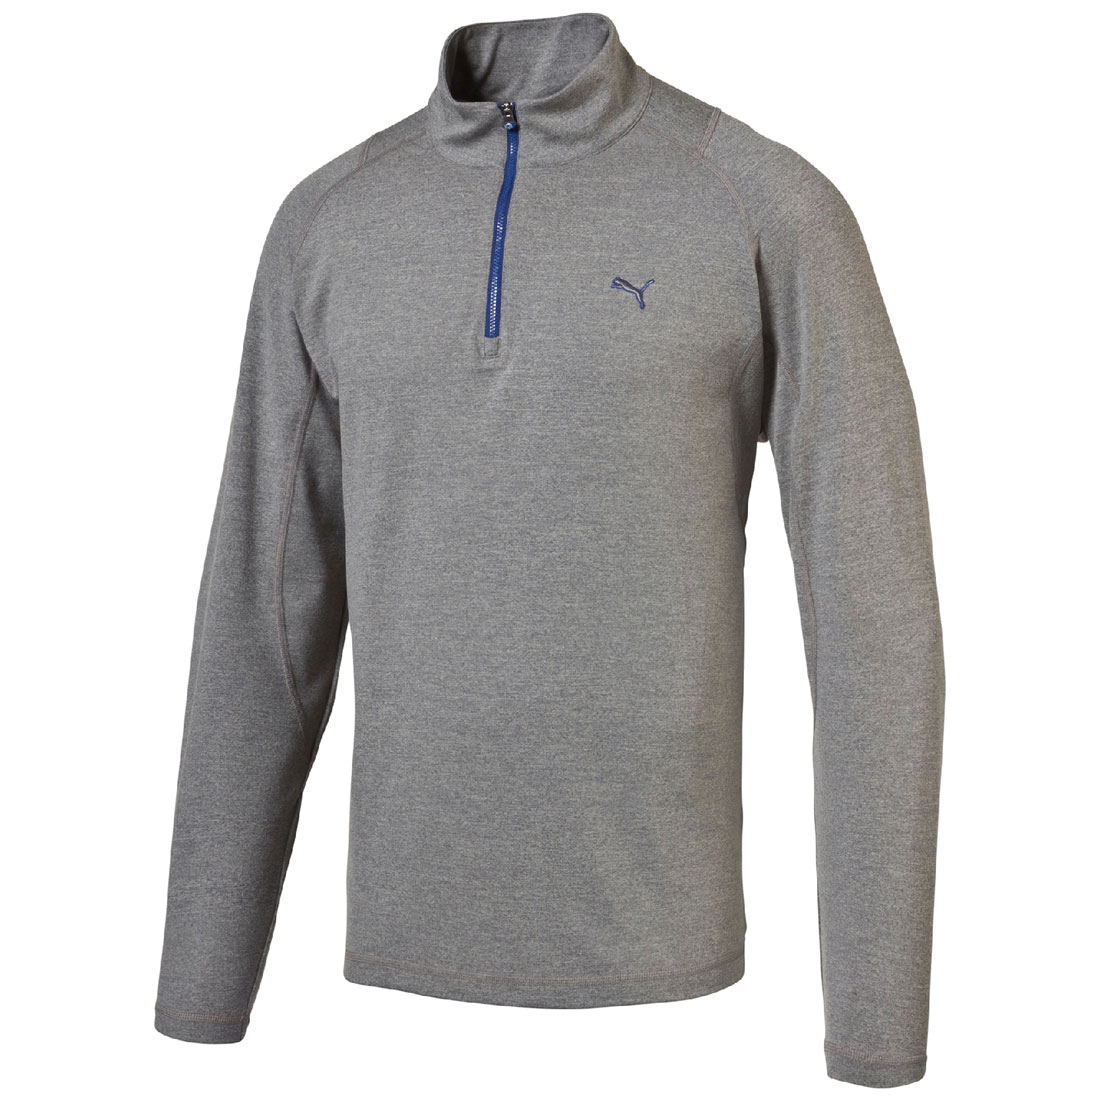 Puma Golf Solid 1/4 ZIP POPOVER Sweater Pullover Dry Cell grau